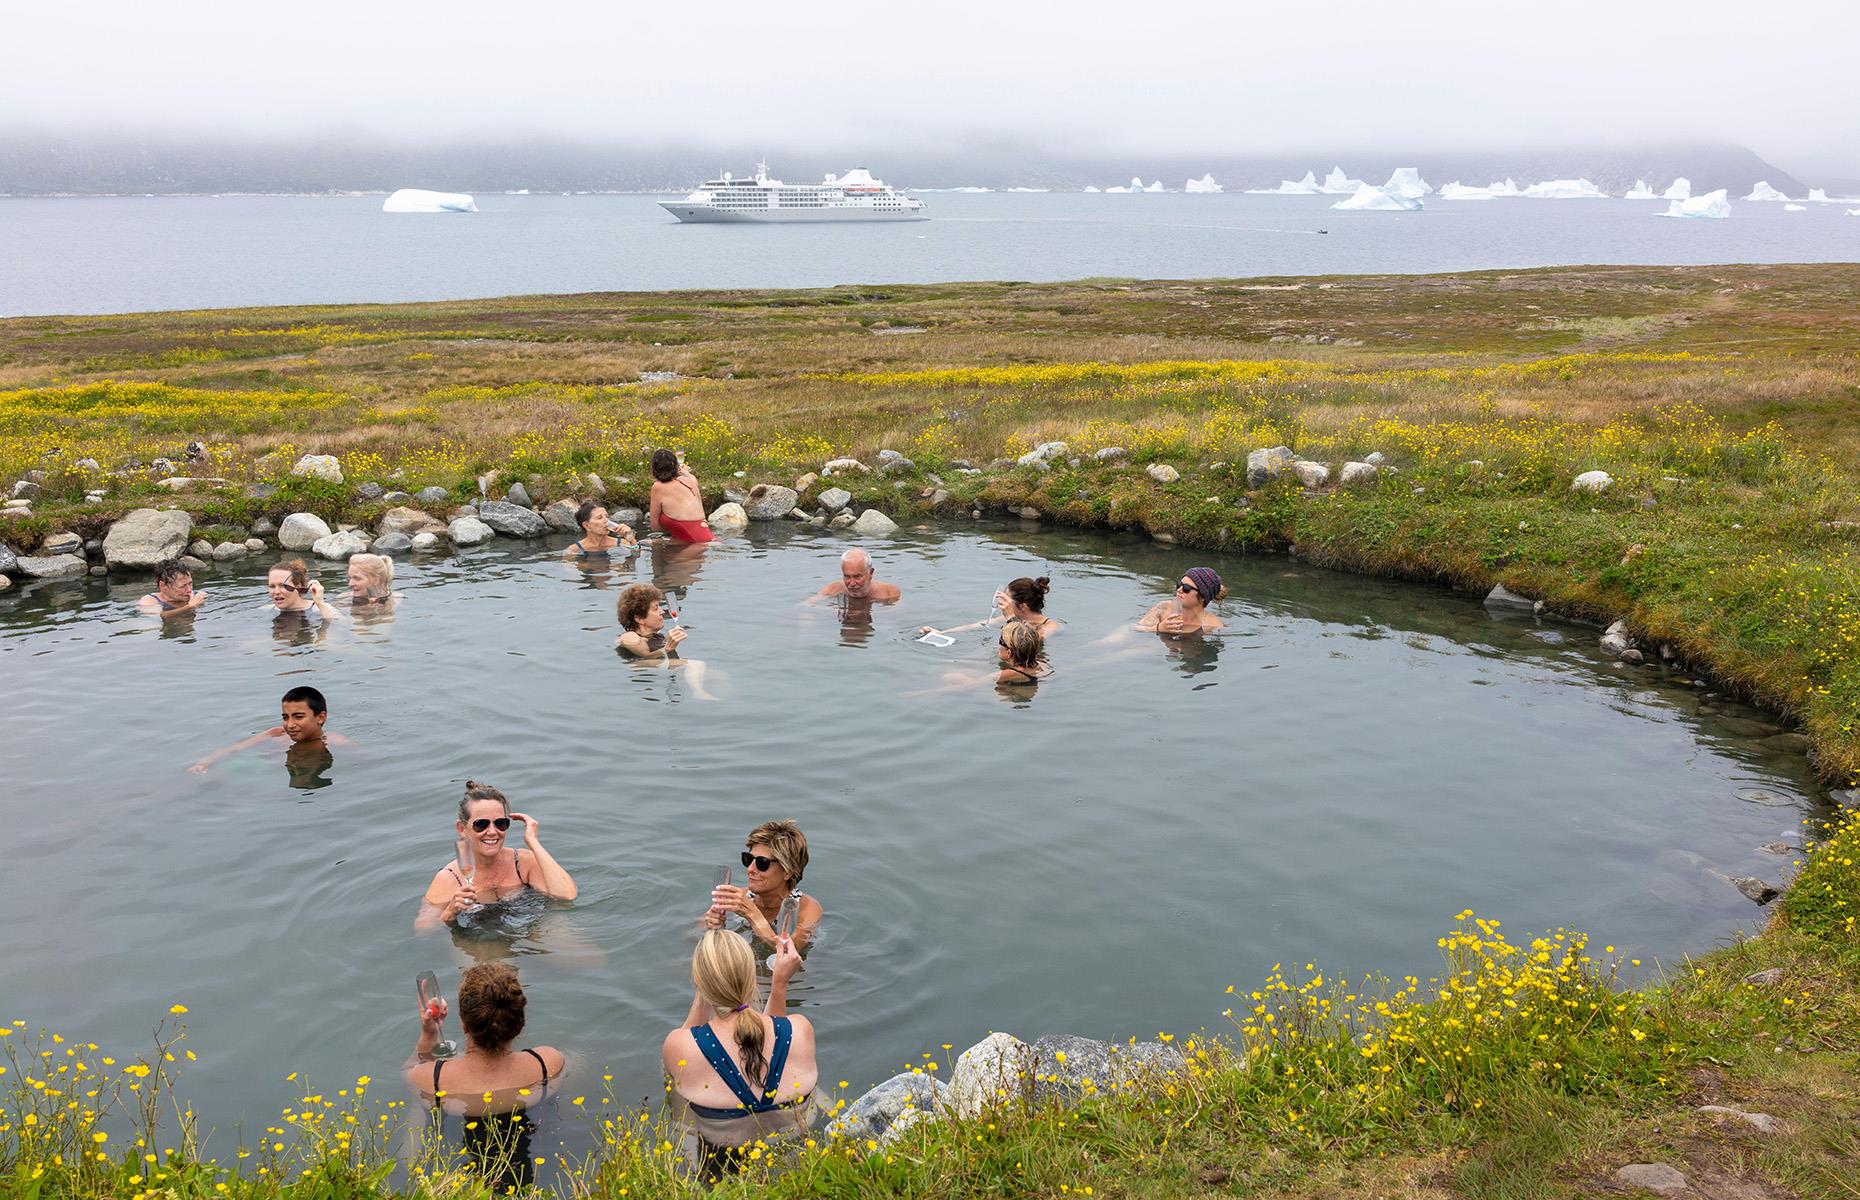 <p>While Greenland may be famed for its icy climate, the hot springs on the uninhabited island of Uunartoq are warm enough to bathe in year-round, with water temperatures ranging from 34-38°C (93-100°F). The isolated island can be reached by boat from the mainland towns of Qaqortoq and Nanortalik, and boasts peaceful surroundings and breathtaking views of mountain peaks and icebergs as far as the eye can see.</p>